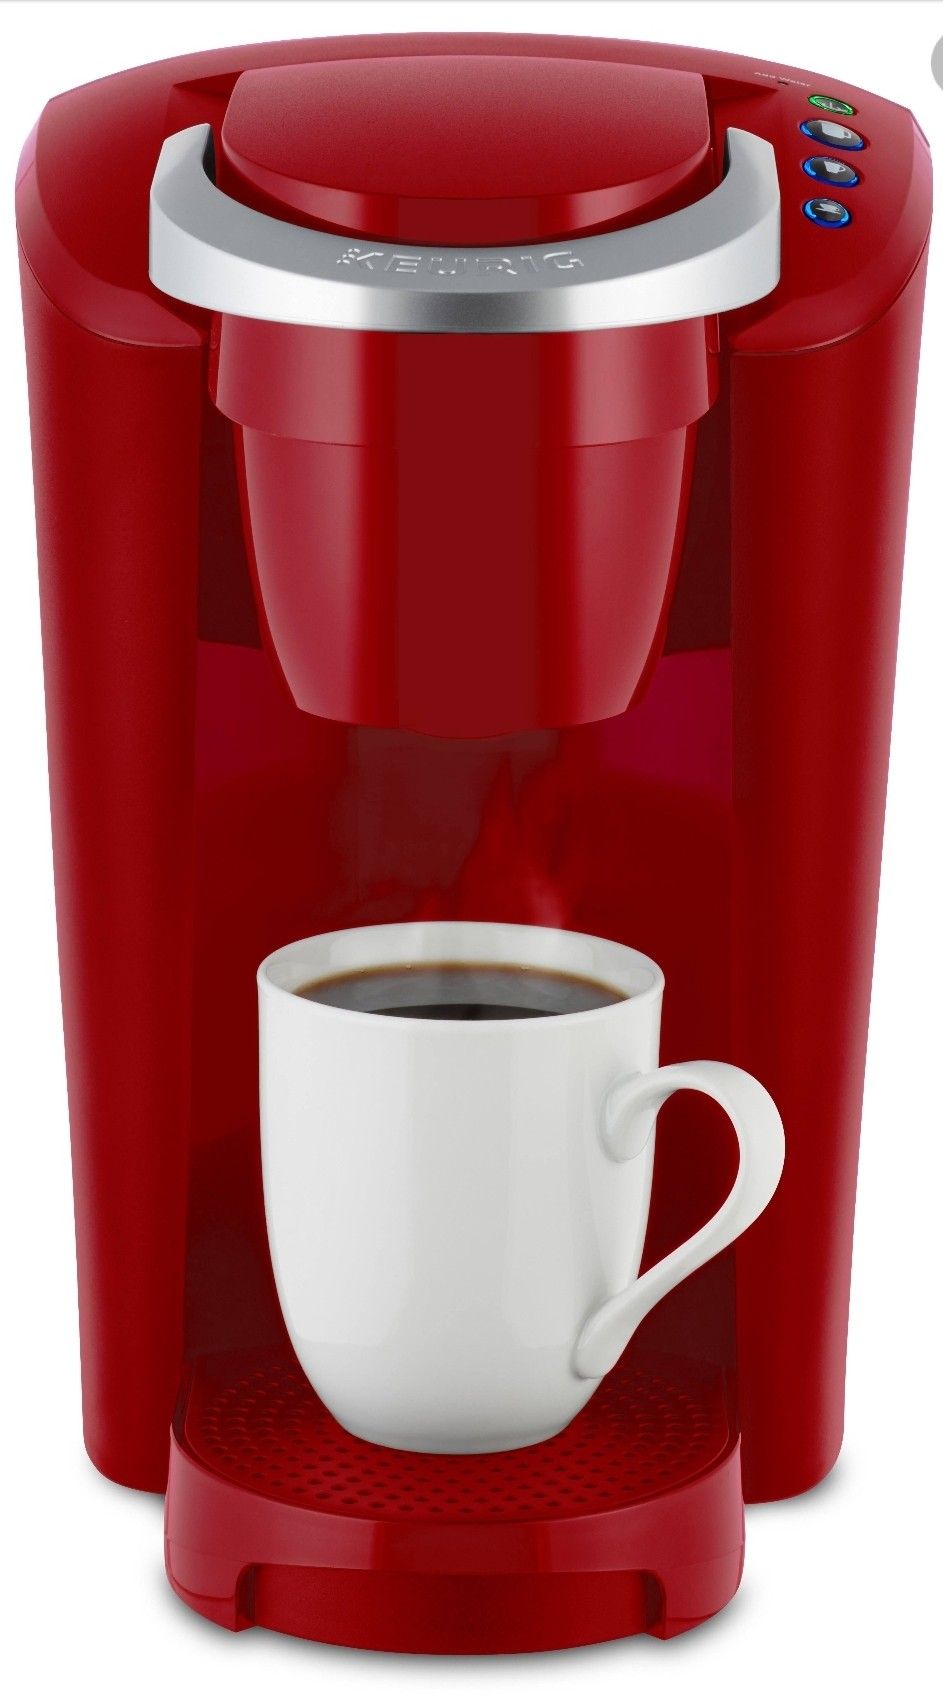 New Keurig K-Compact Single-Serve K-Cup Pod Coffee Maker, Imperial Red